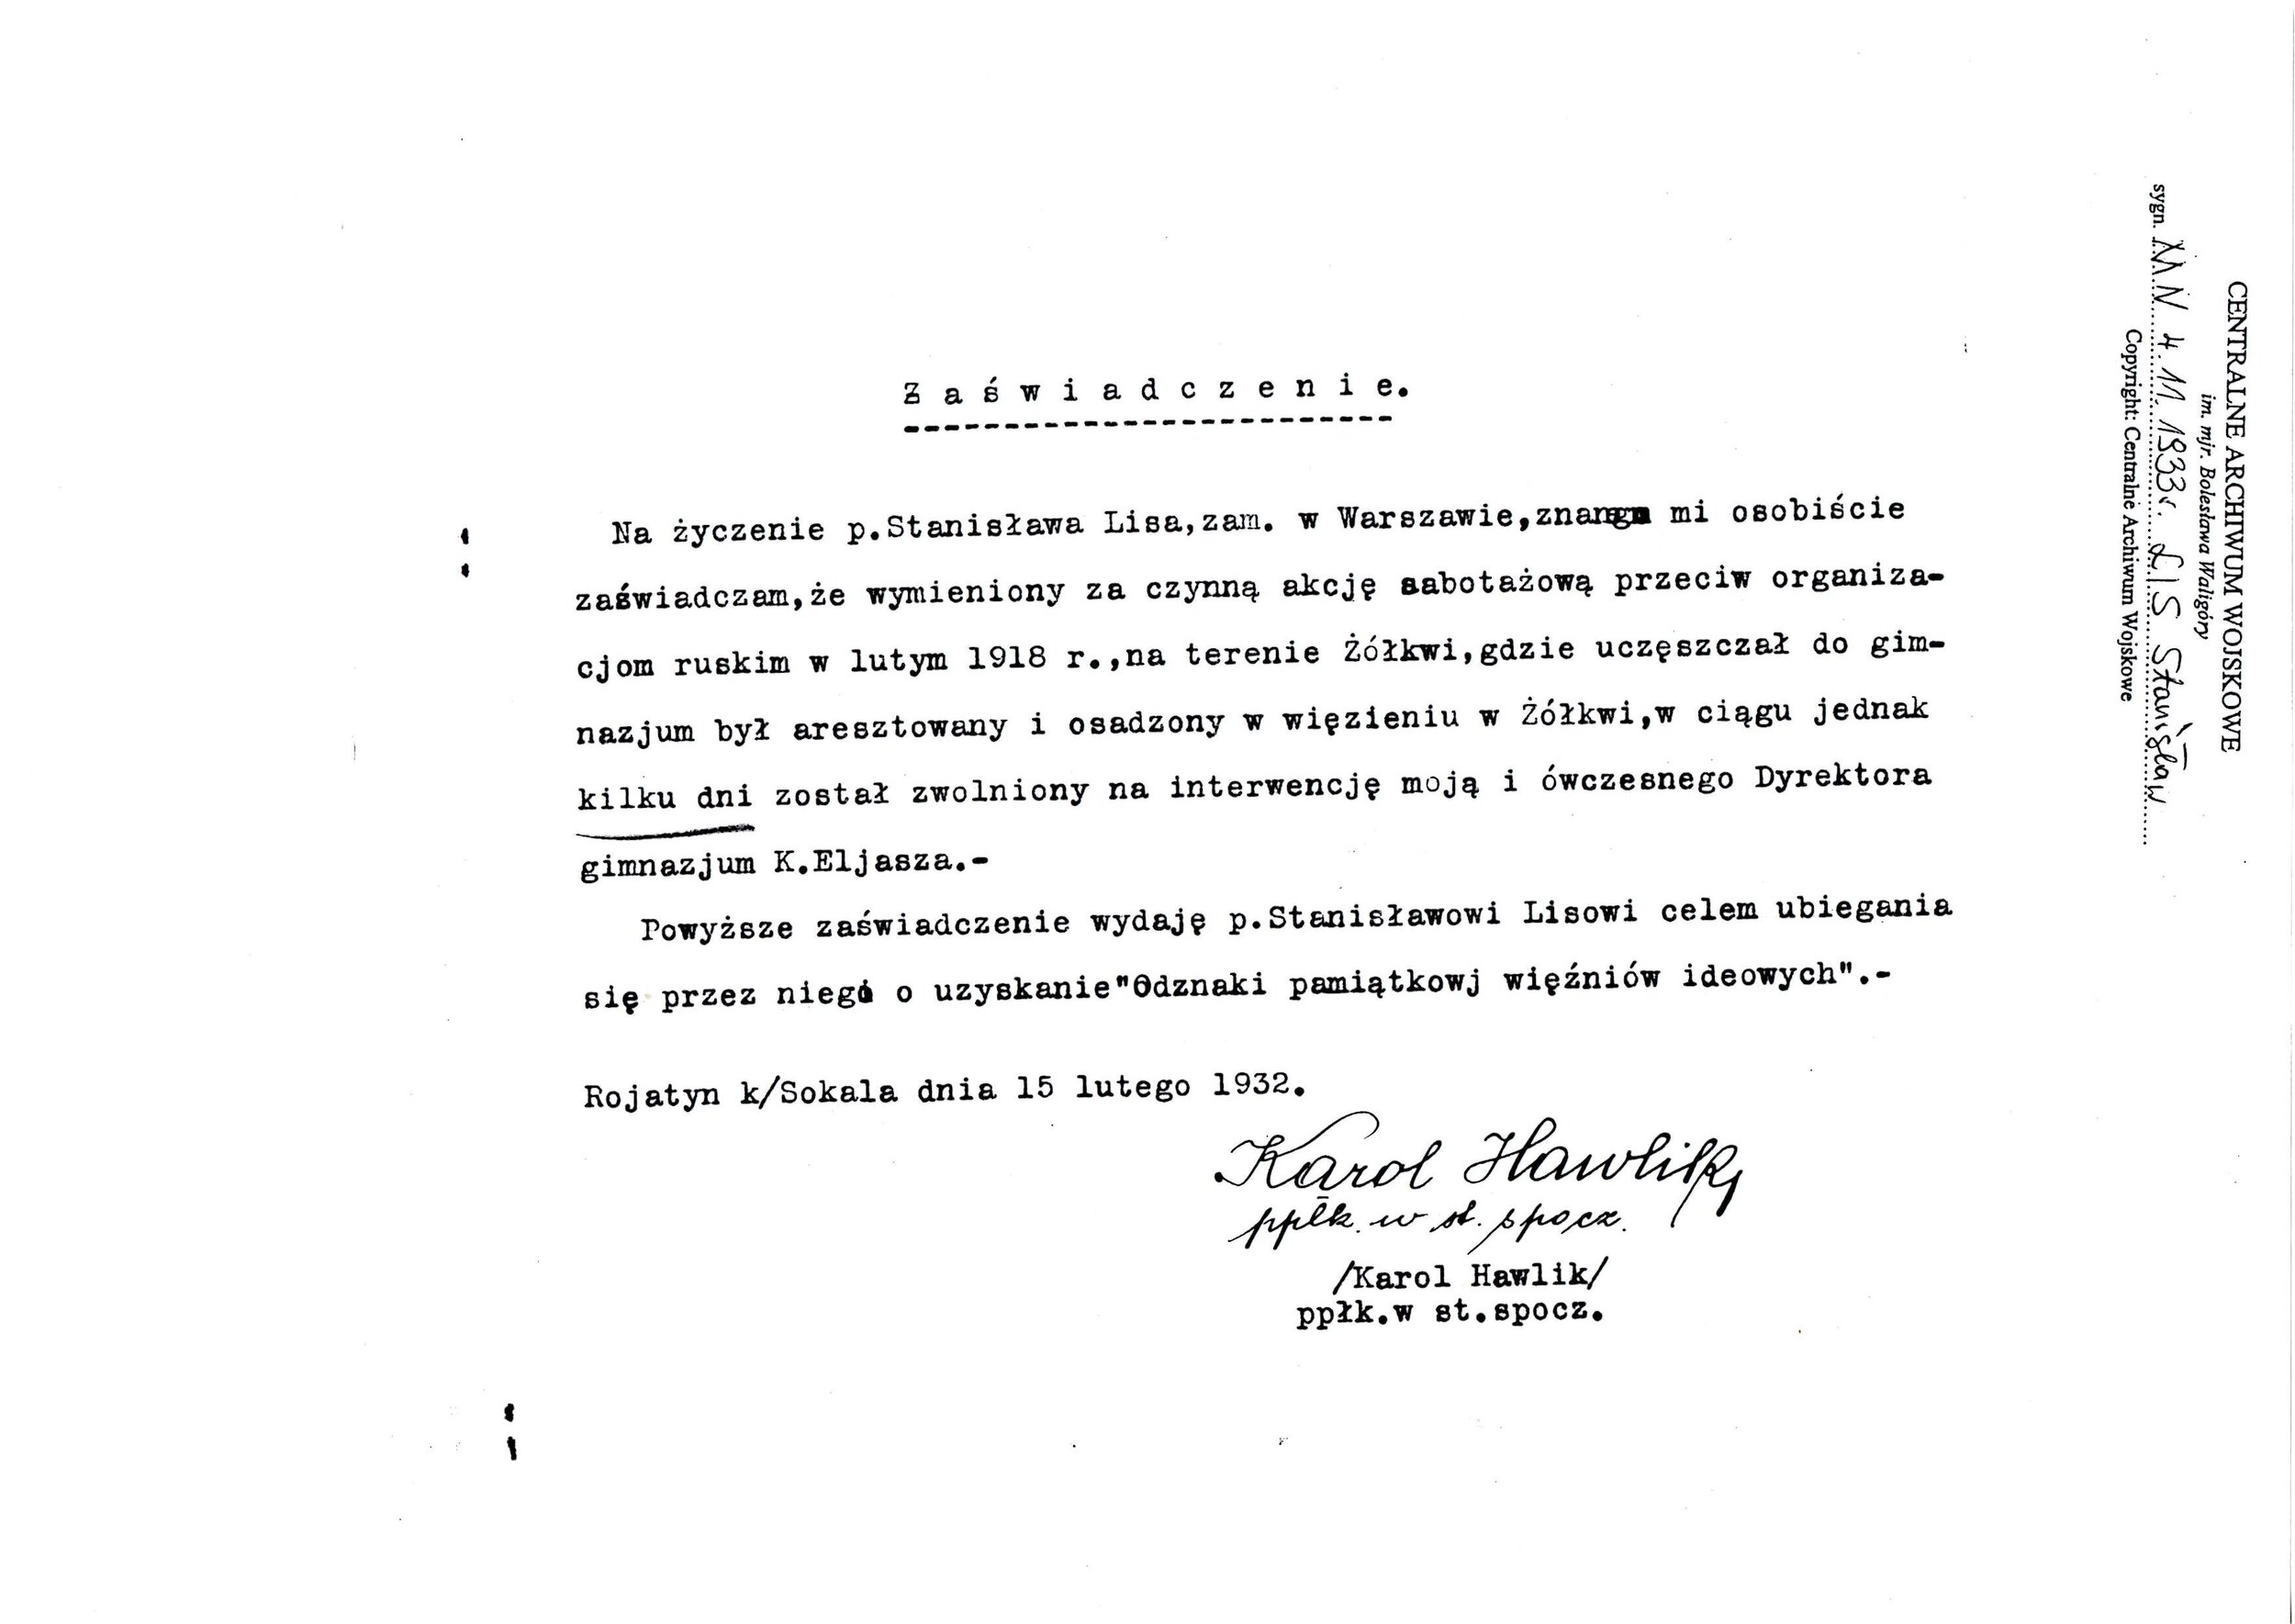 Stanislaw Lis Medal of Independance Document 3 page 3.jpg